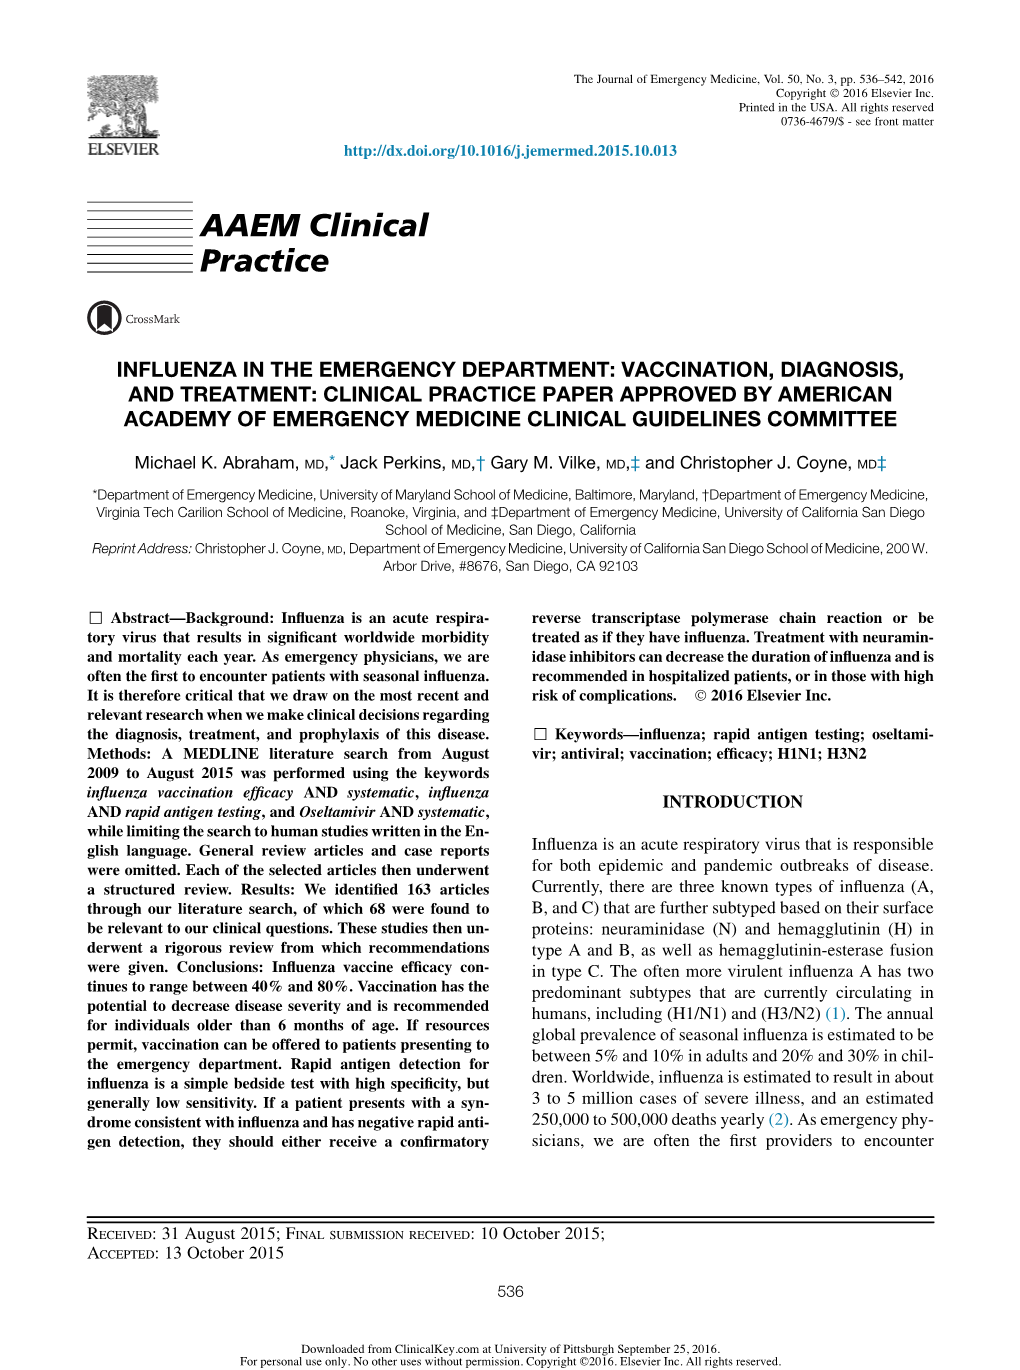 Influenza in the Emergency Department: Vaccination, Diagnosis, And&Nbsp;Treatment: Clinical Practice Paper Approved by Ameri